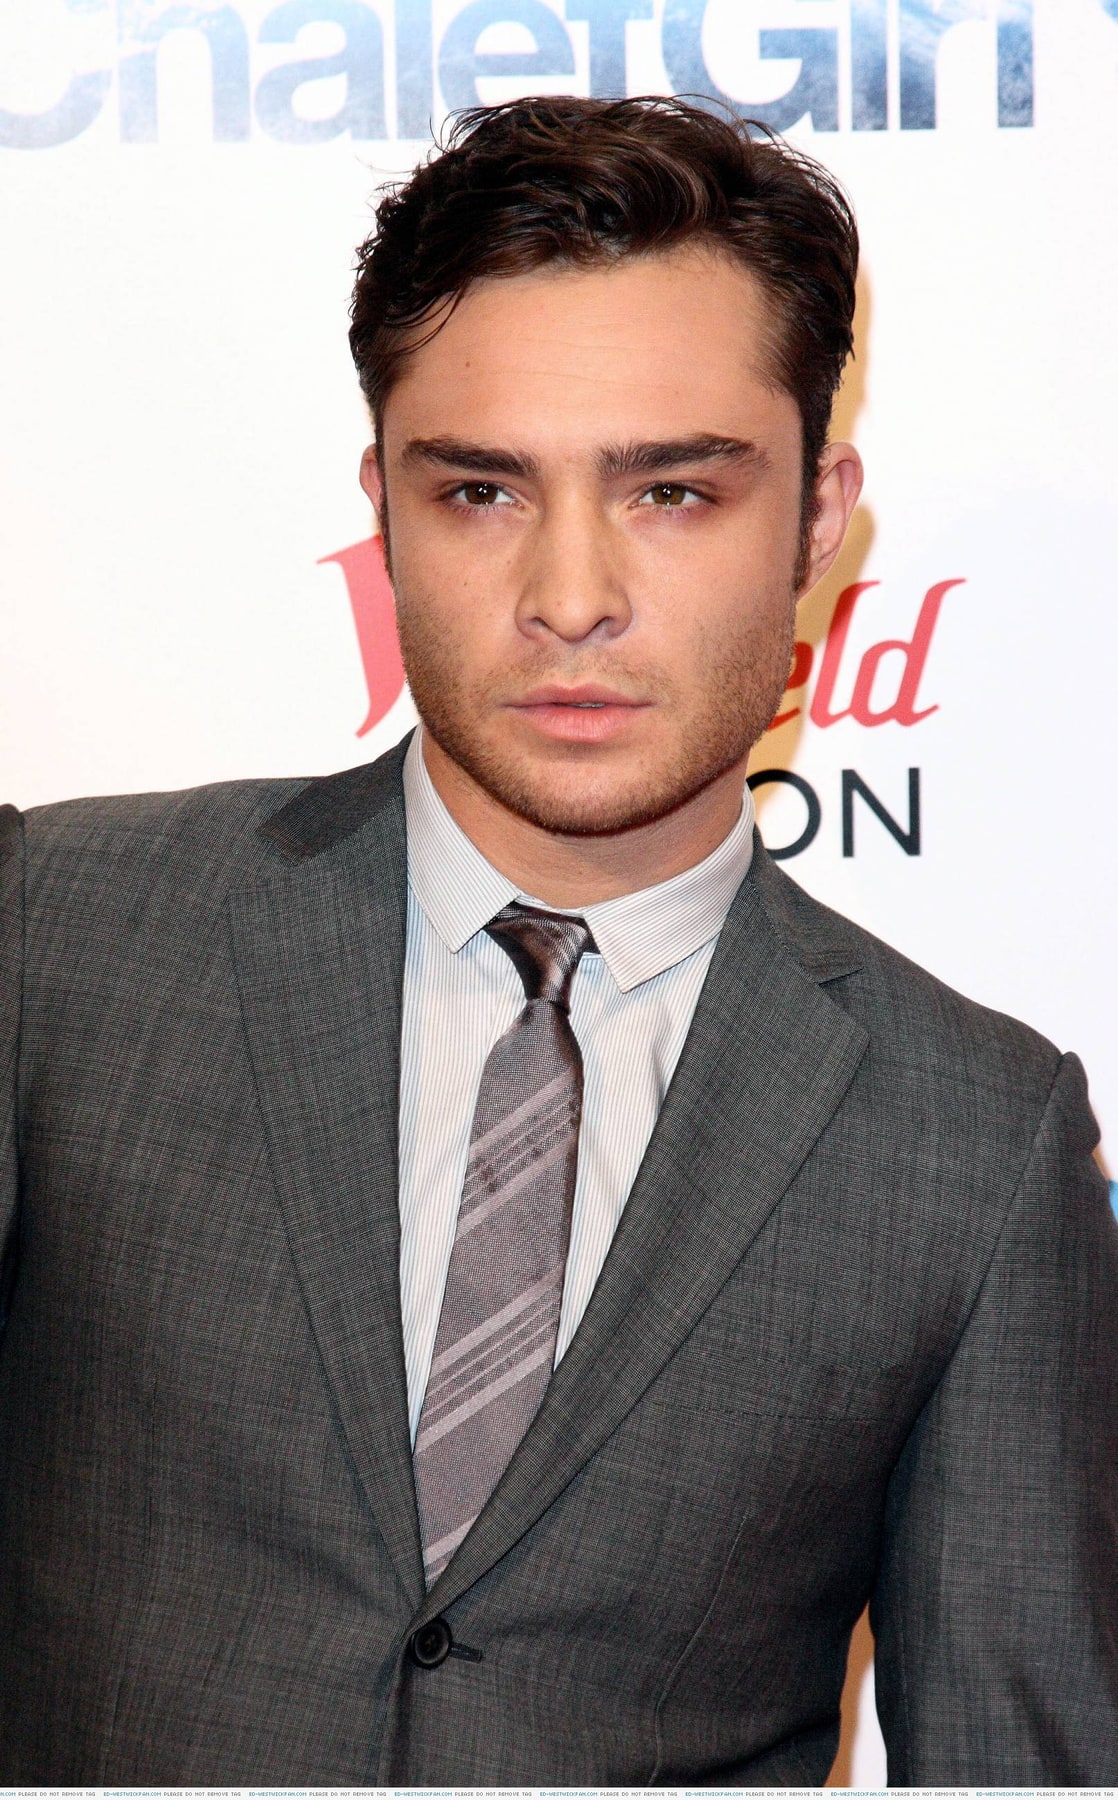 Ed Westwick replaced in TV drama Ordeal By Innocence after 